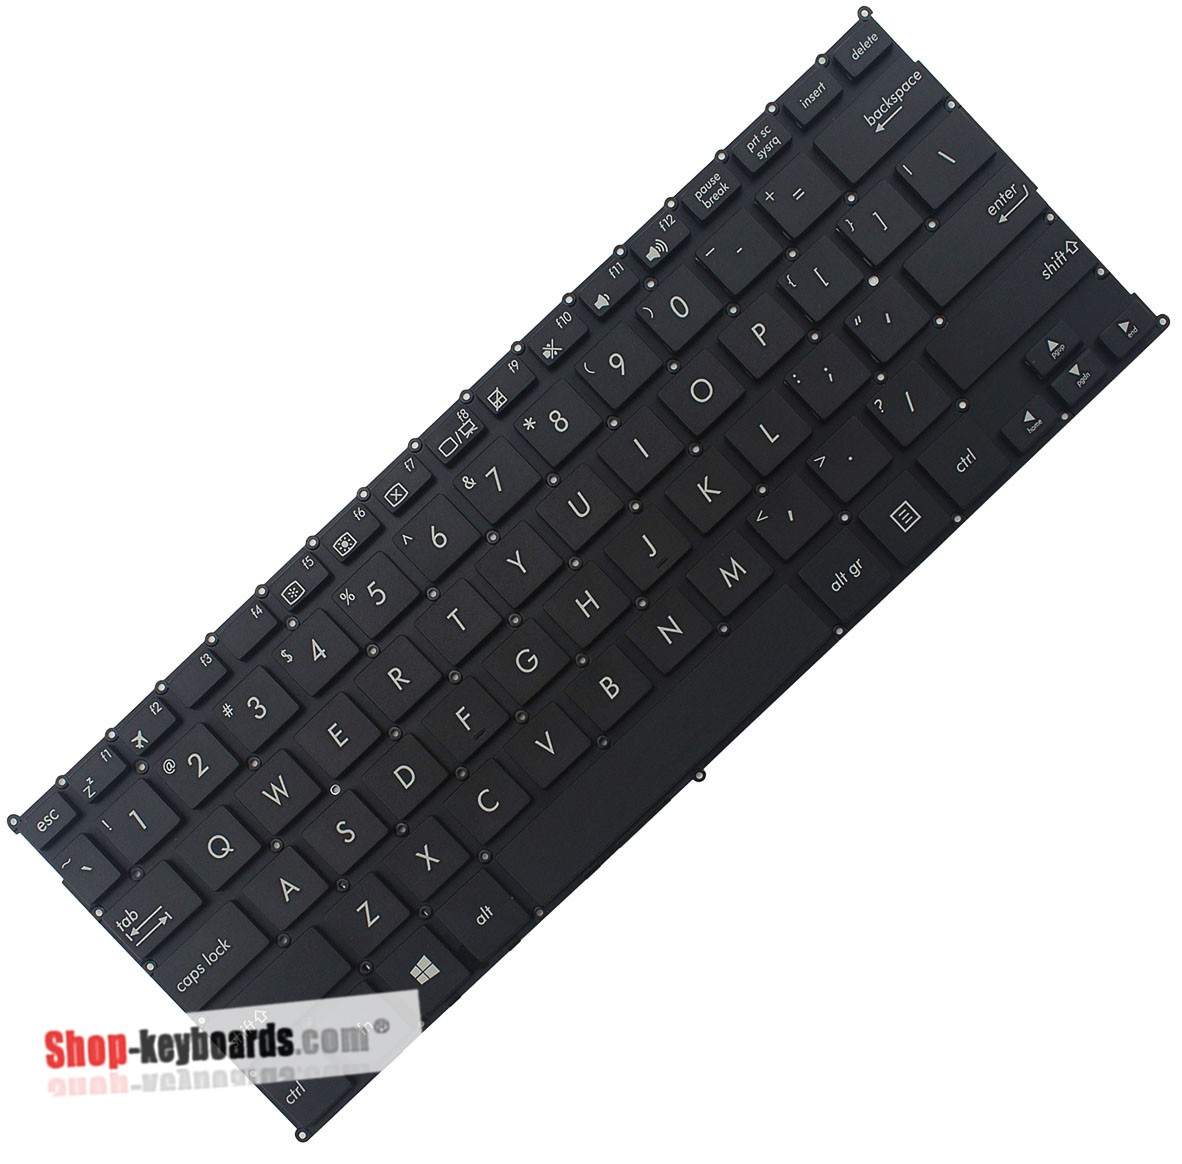 Asus VivoBook X201E Keyboard replacement